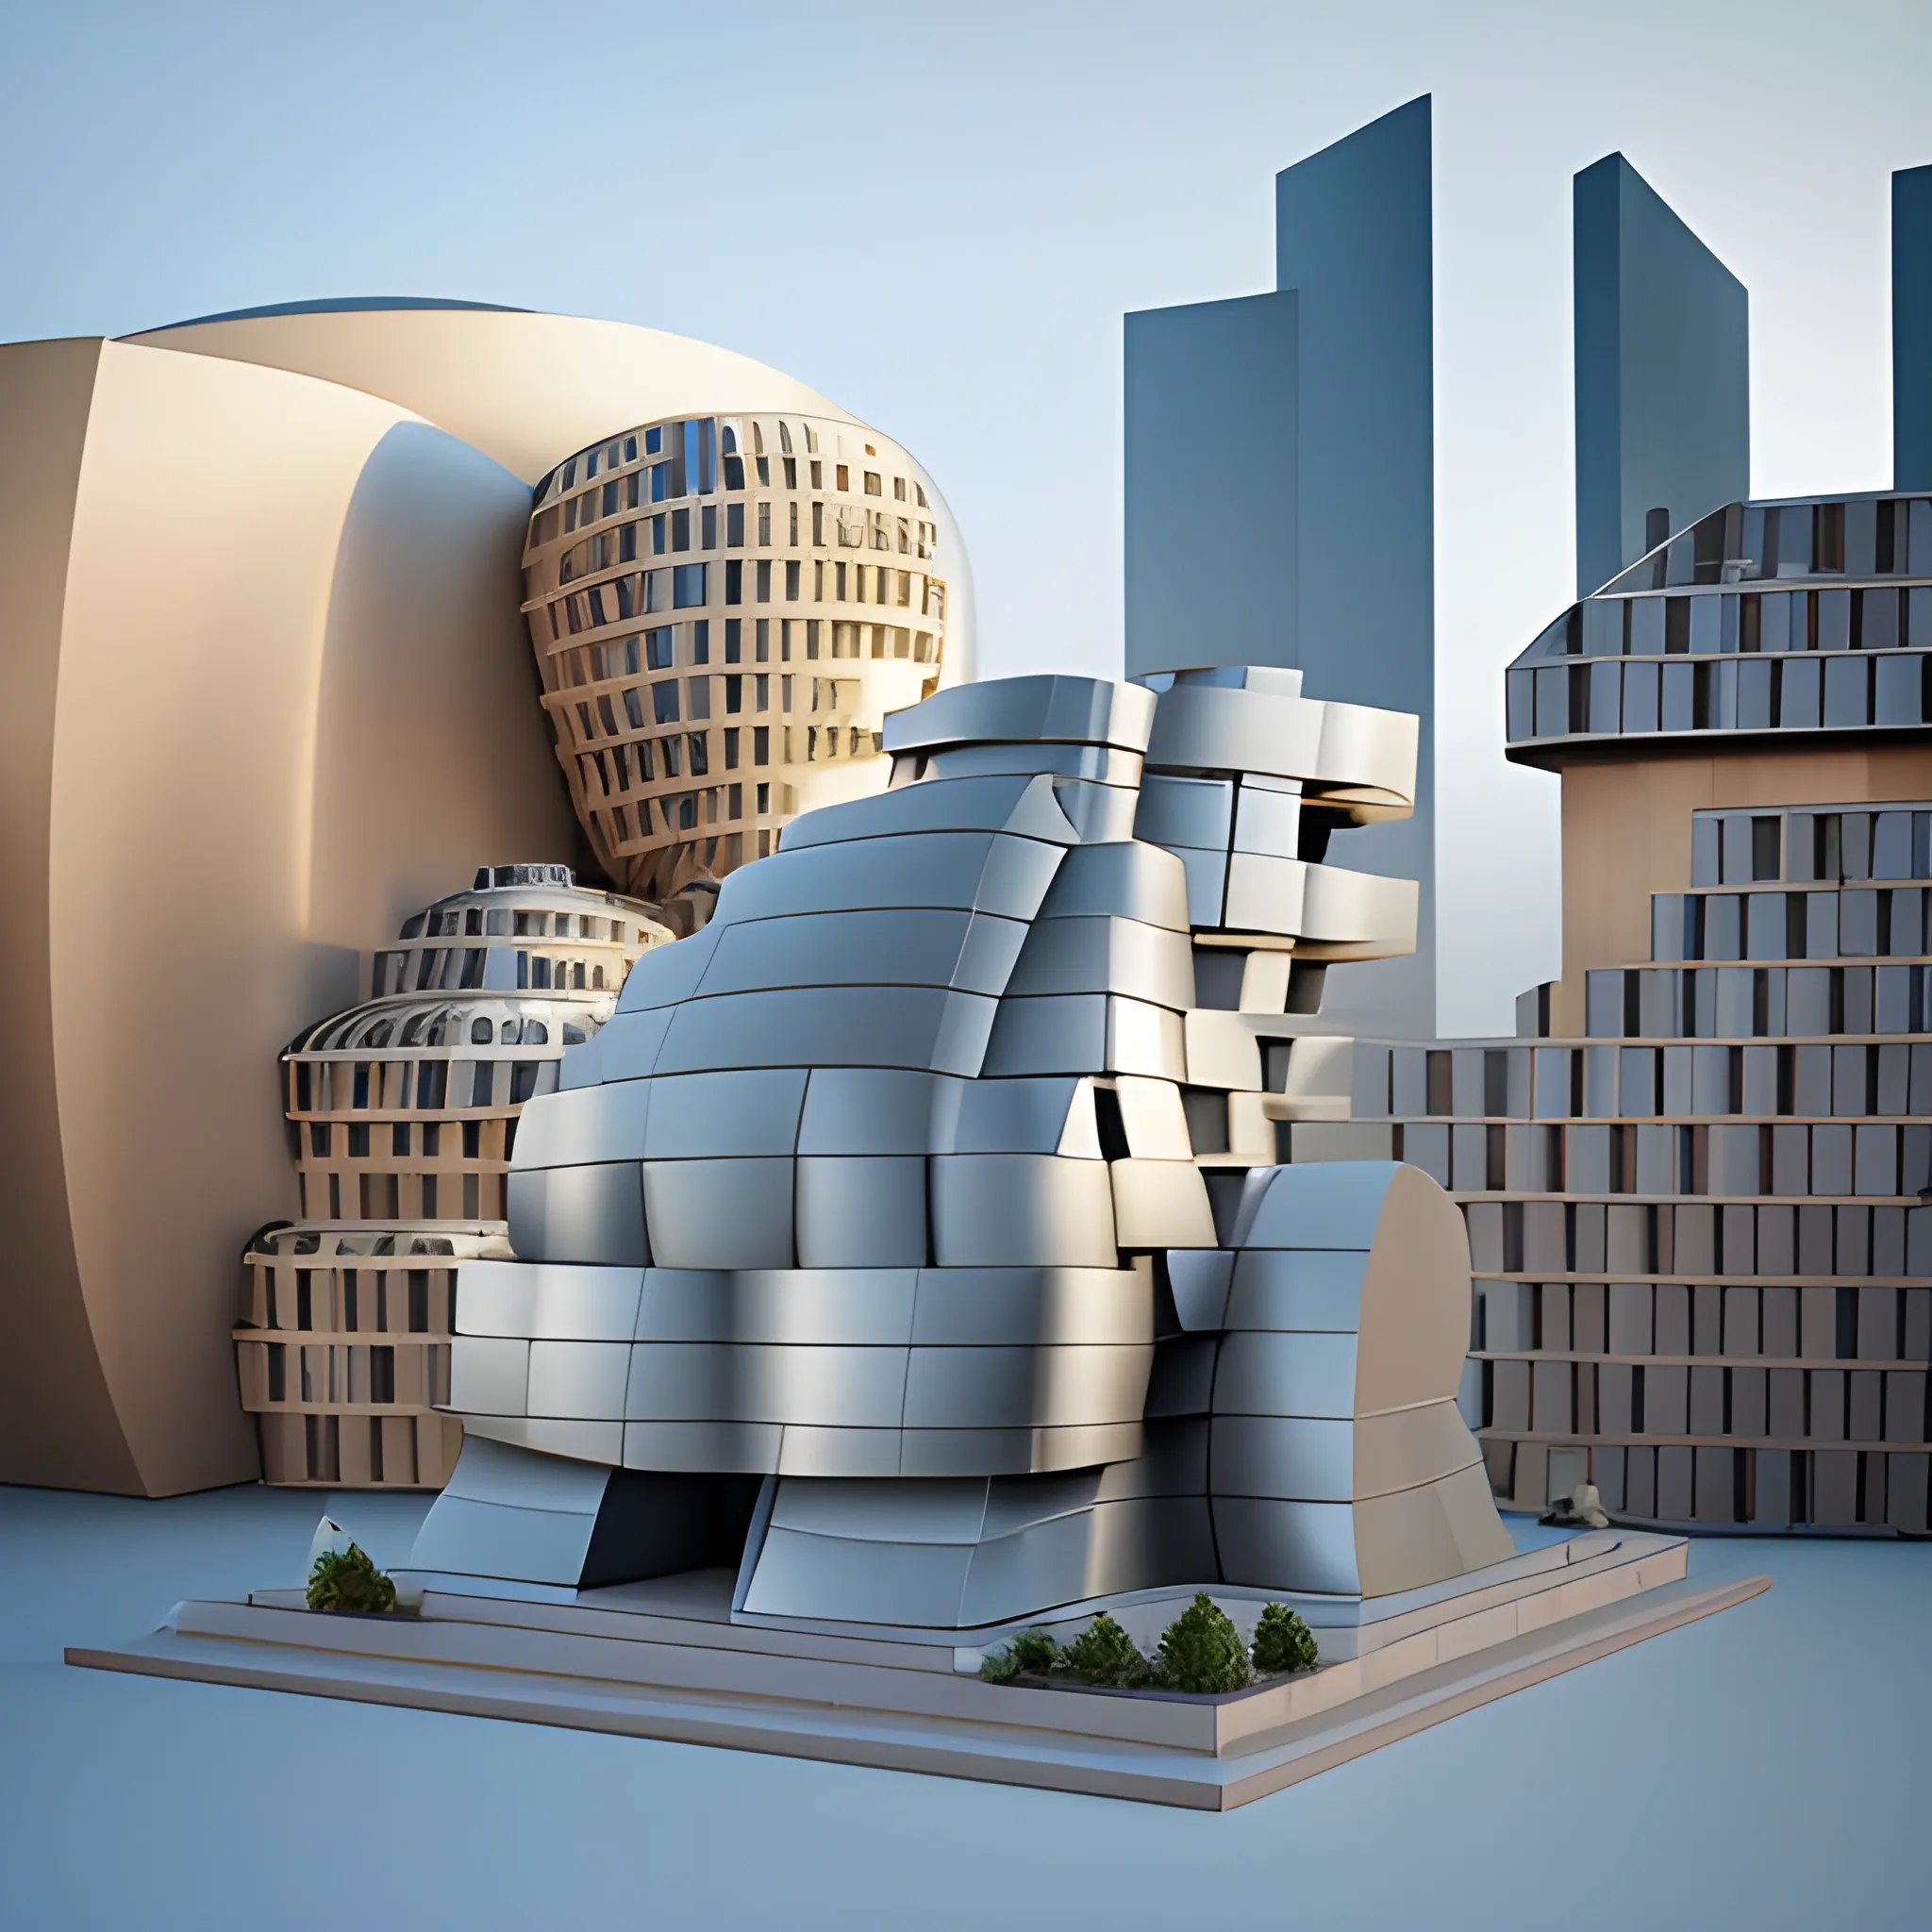 Create a monumental modern sculptured italian big dinner folk   in  Frank Gehry style, simple design as Bahaus style, minimal, geometric simplicity, feature with gown, toga concept ,Bronce material surface and brick base, asymetric composition,   big locomotion expression,  blue sky background, pretty detailed HD render, classic base, fountain, 3D, 3D